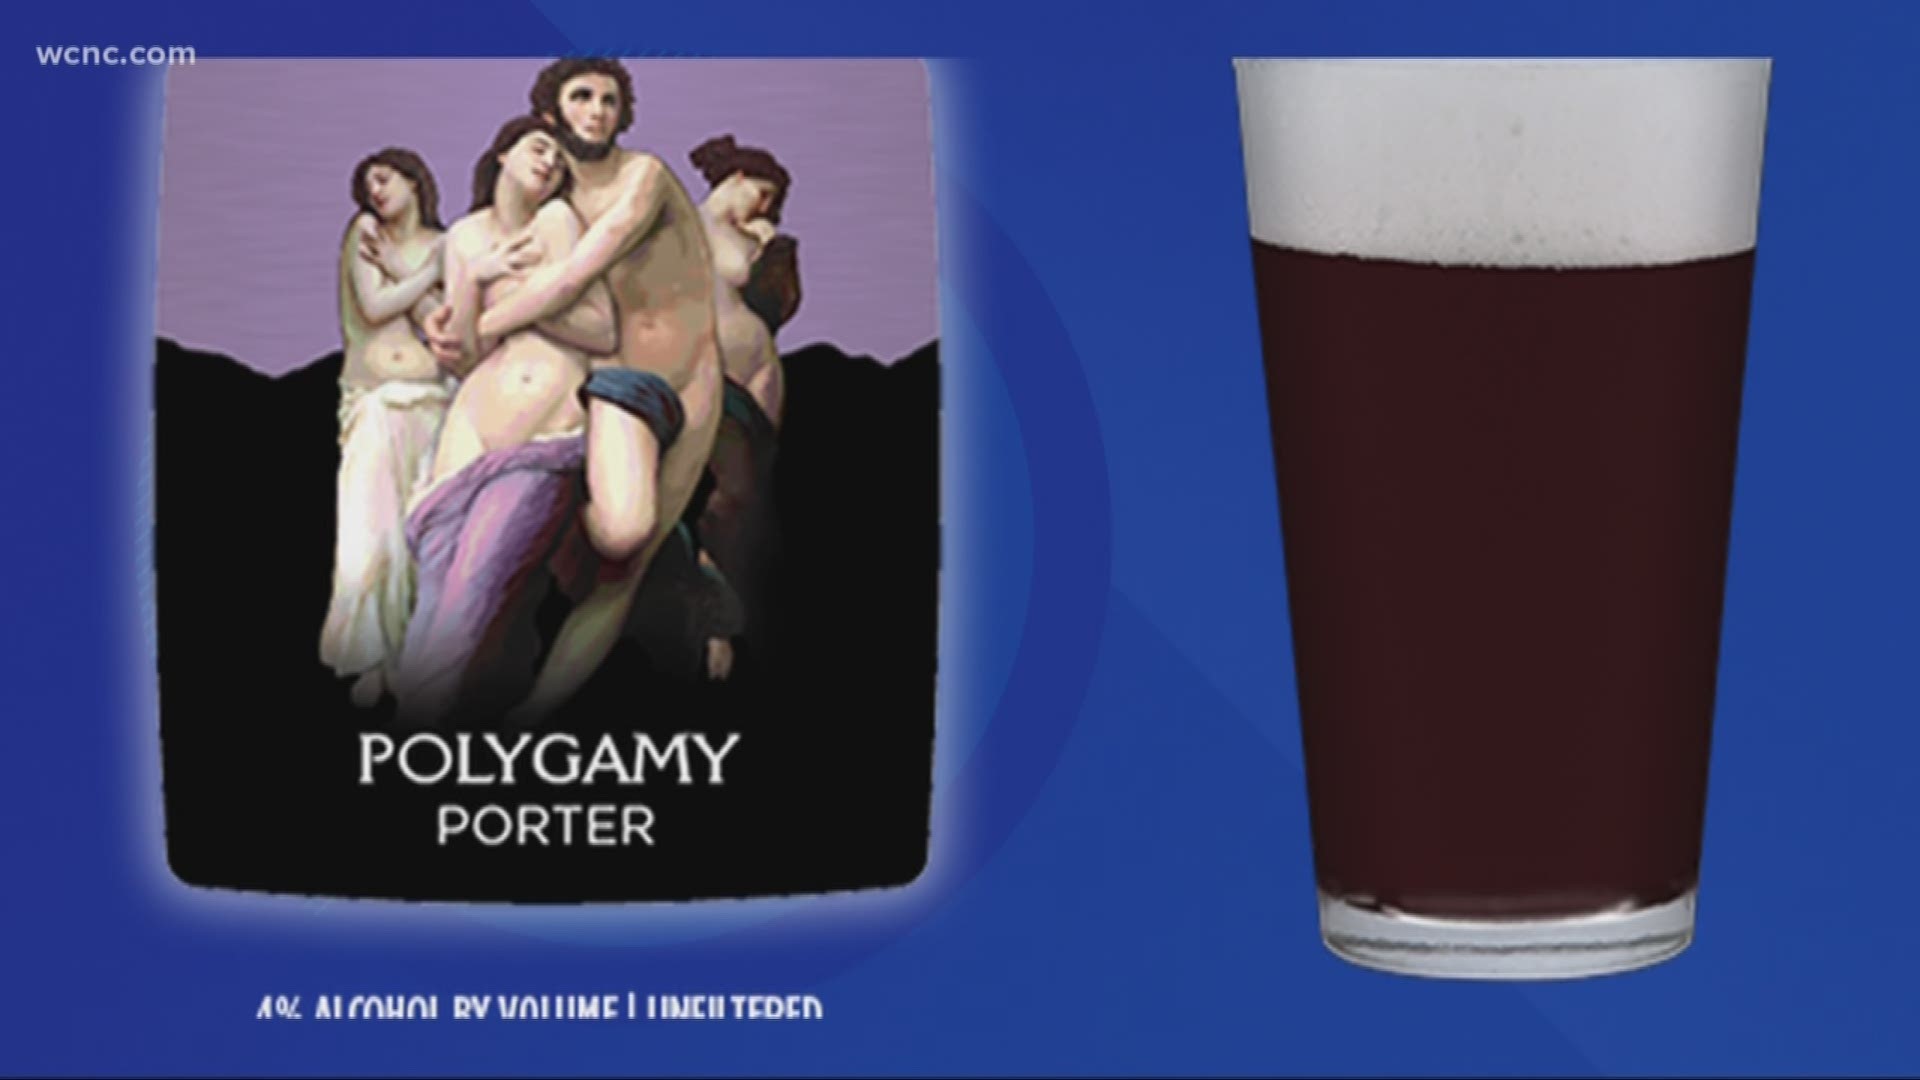 North Carolina's ABC board is considering whether they'll allow a Utah-based brewery to sell its "Polygamy Porter" beer in the state.